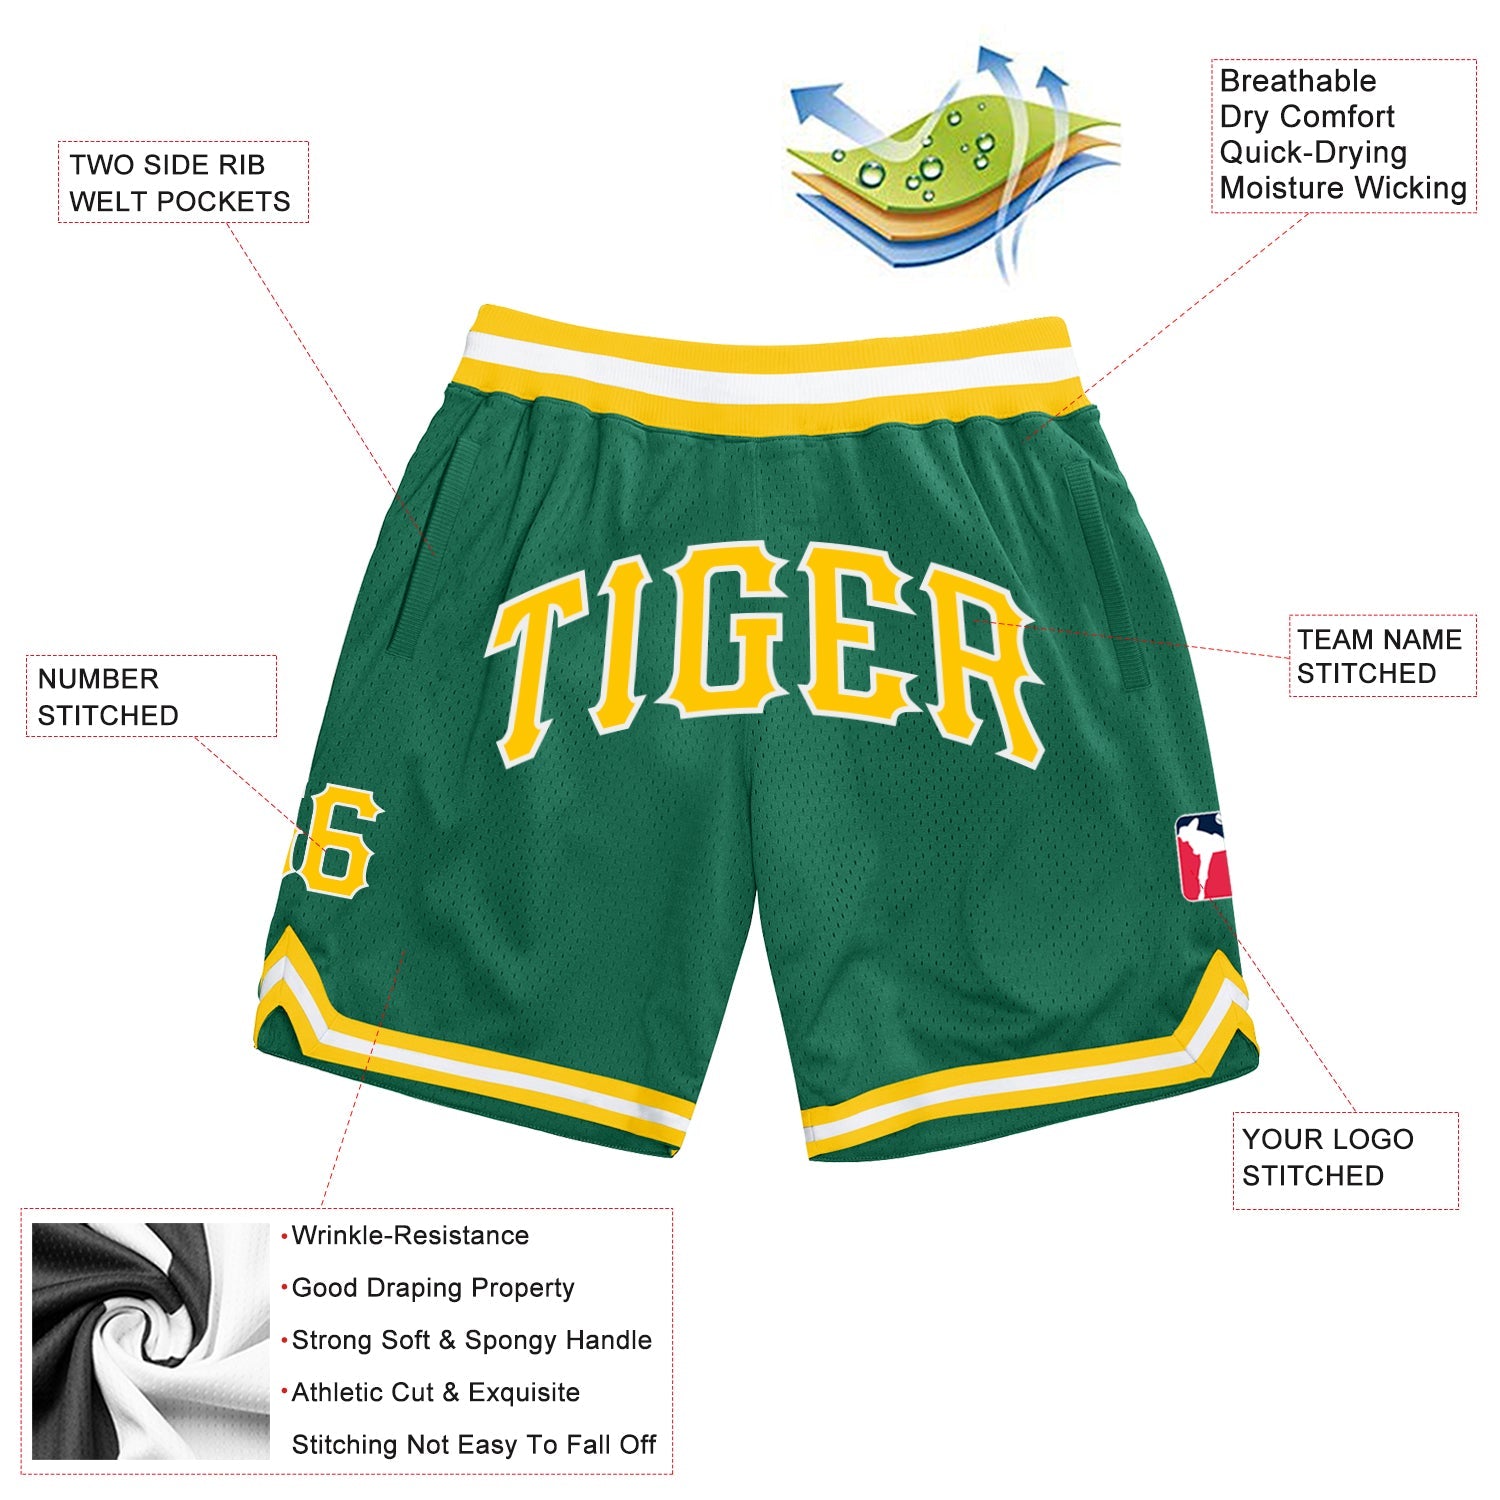 Custom Kelly Green Gold-White Authentic Throwback Basketball Shorts